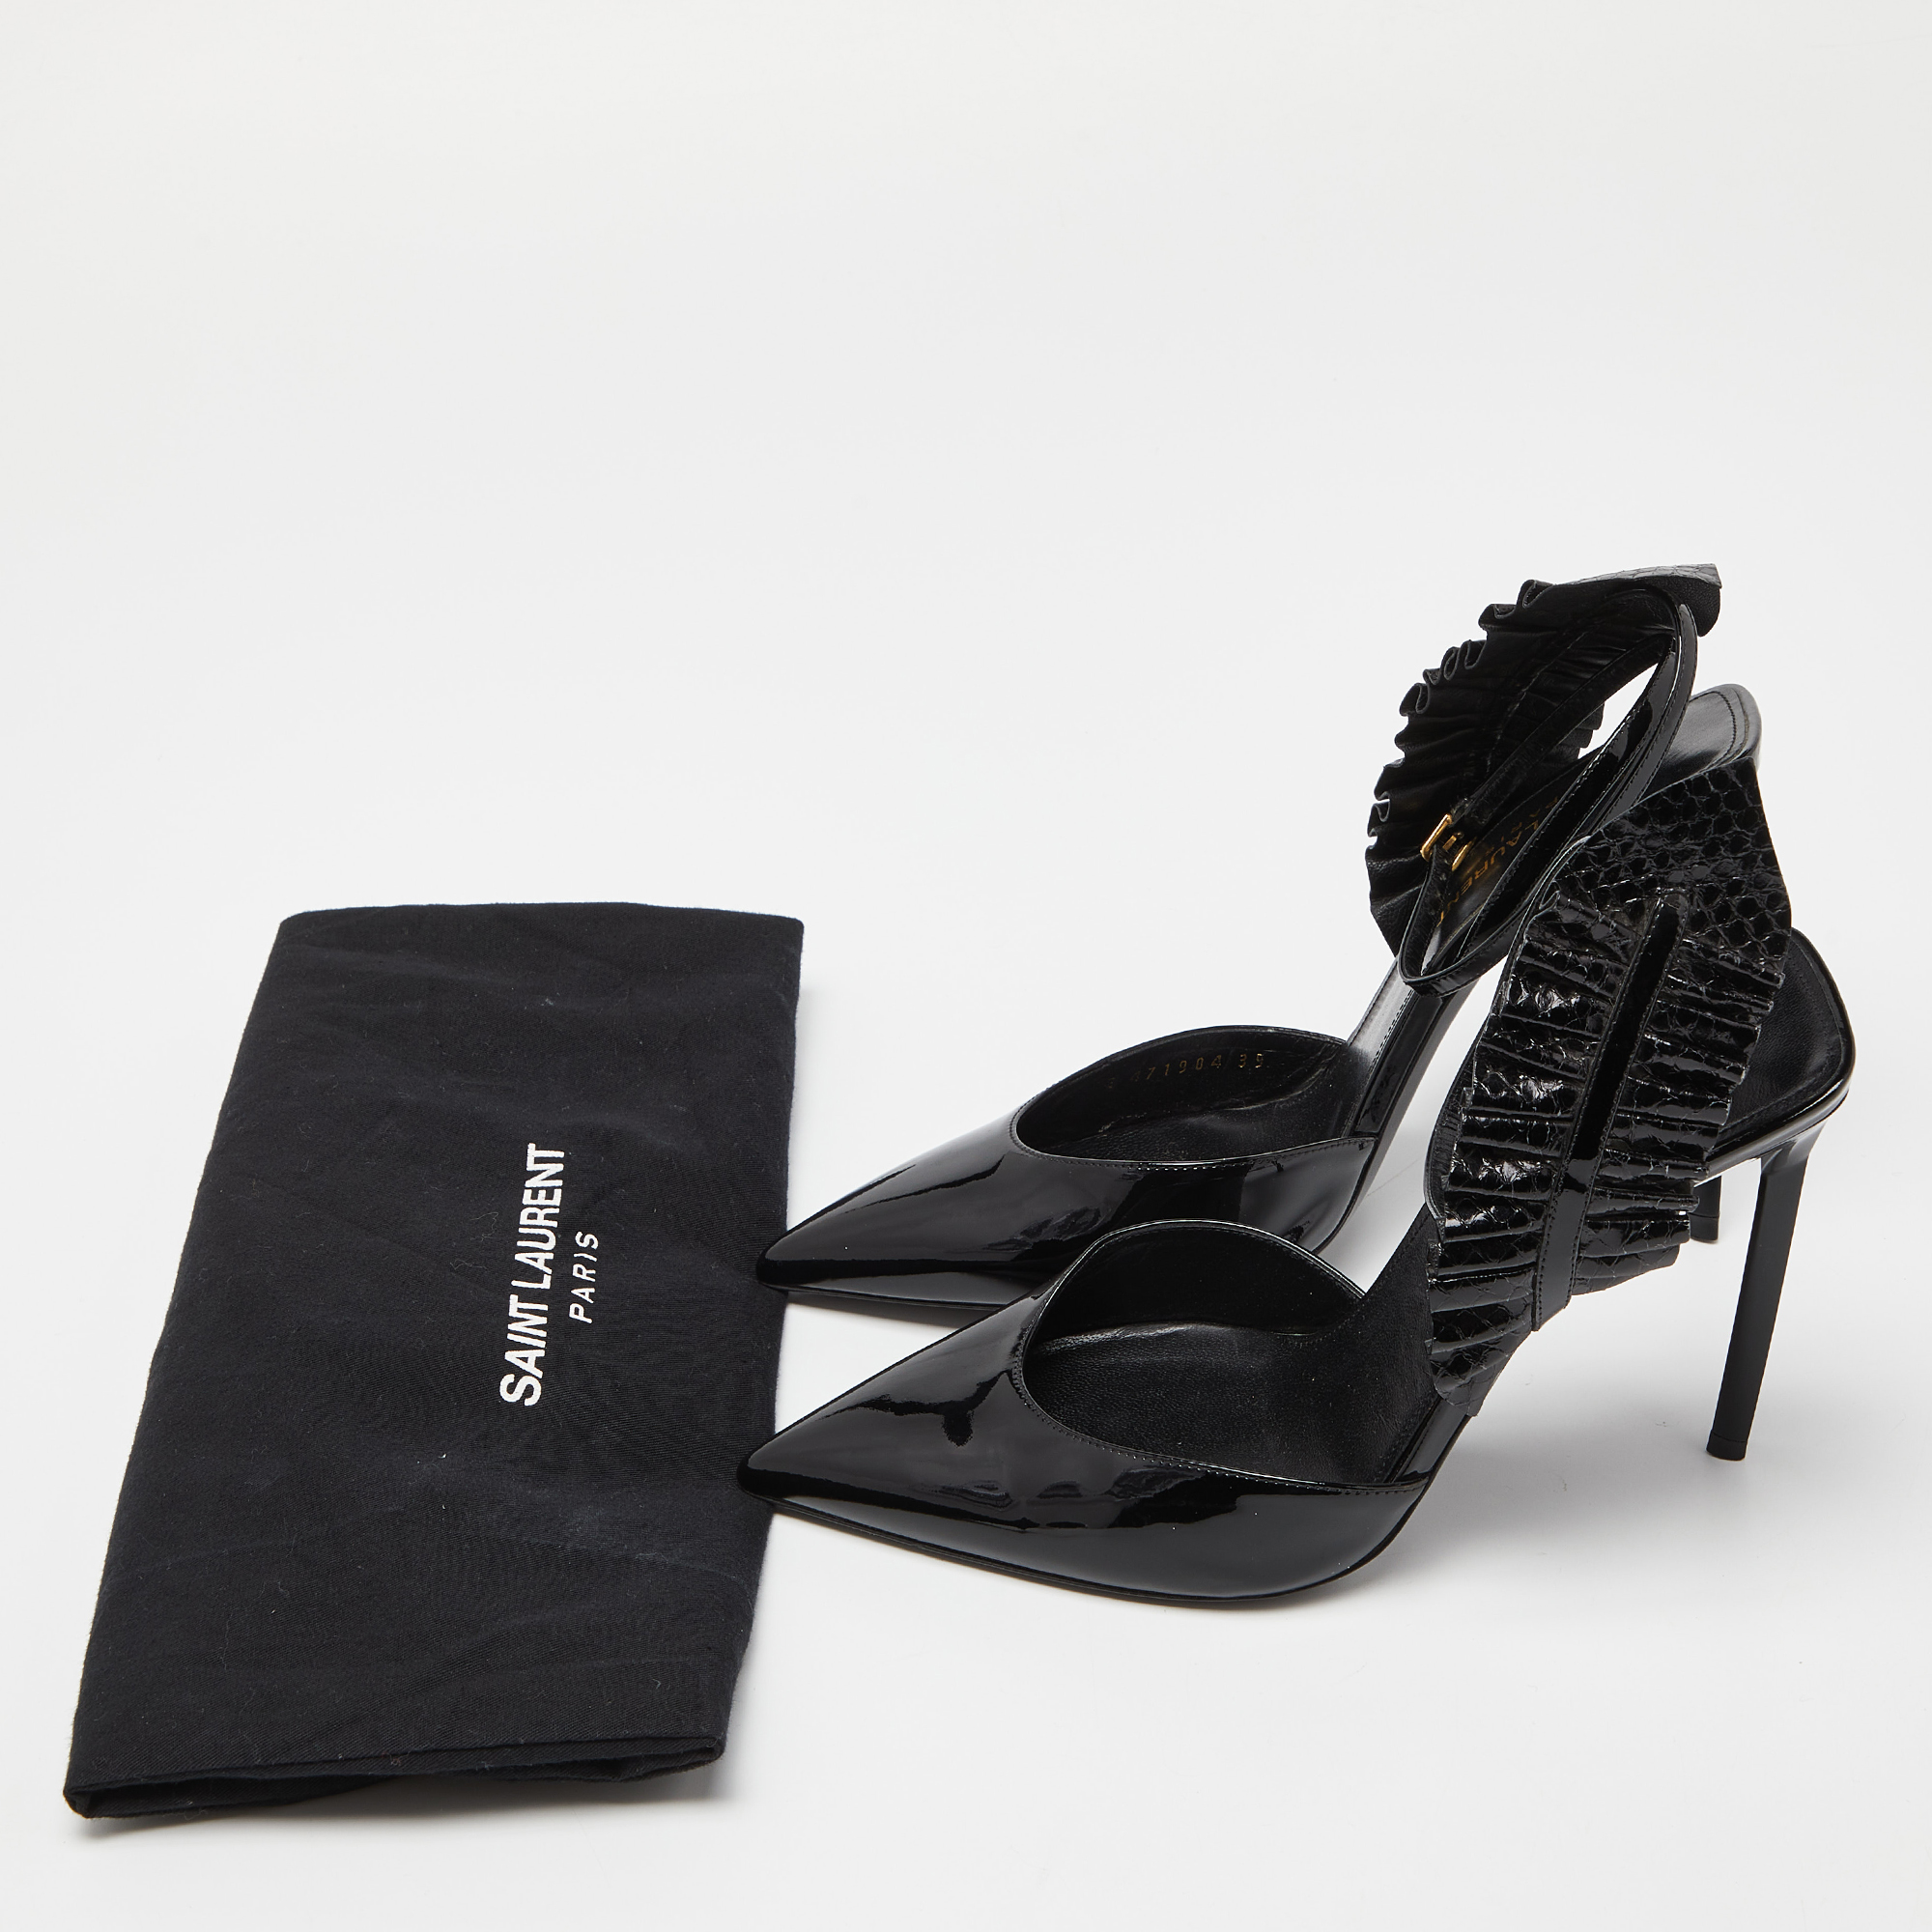 Saint Laurent Black Patent Leather And Watersnake Leather Pointed Toe Slingback Sandals Size 39